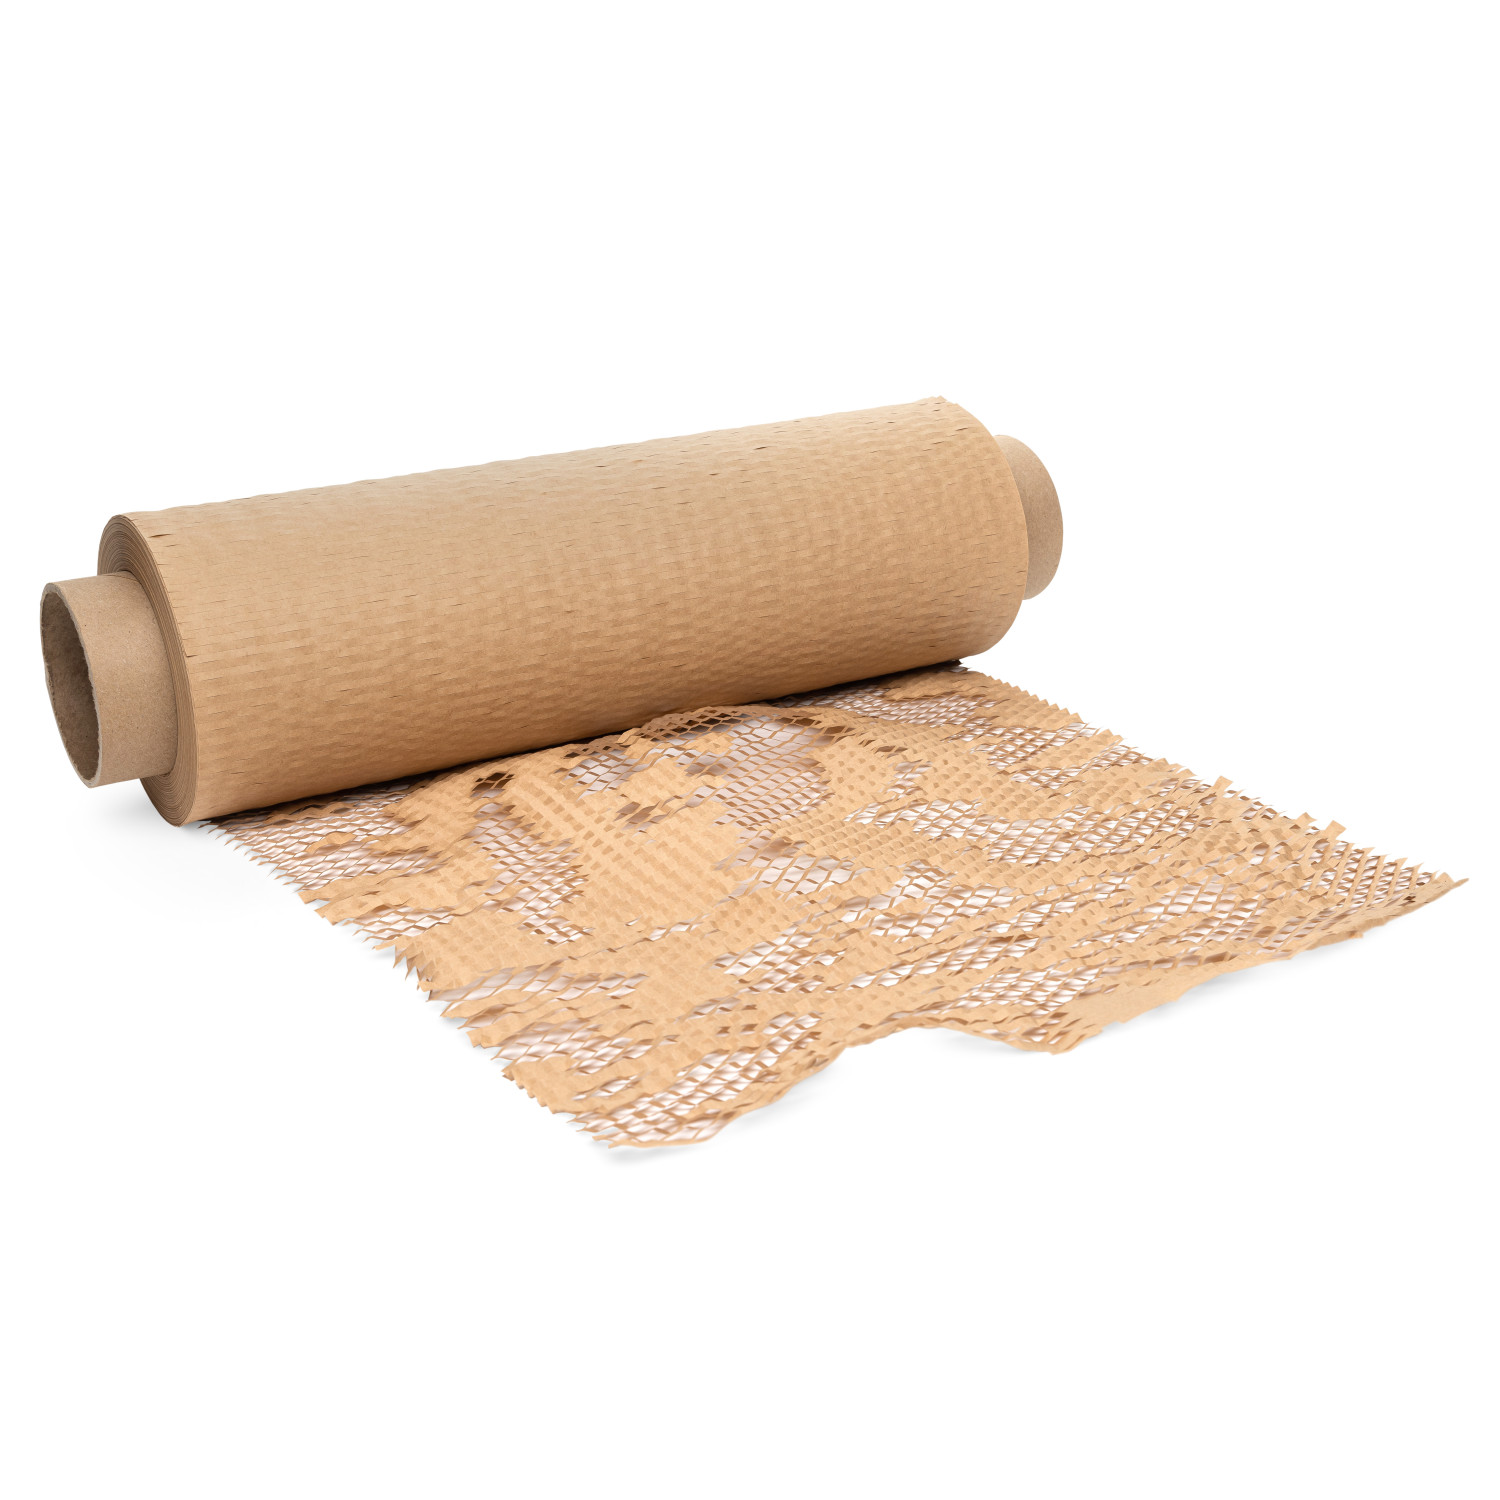 MIVERYEA Honeycomb Packing Paper, 15x300' Eco Friendly Packing Paper for Breakable Recyclable Honeycomb Paper Moving Supplies Bubble Paper Wrapping